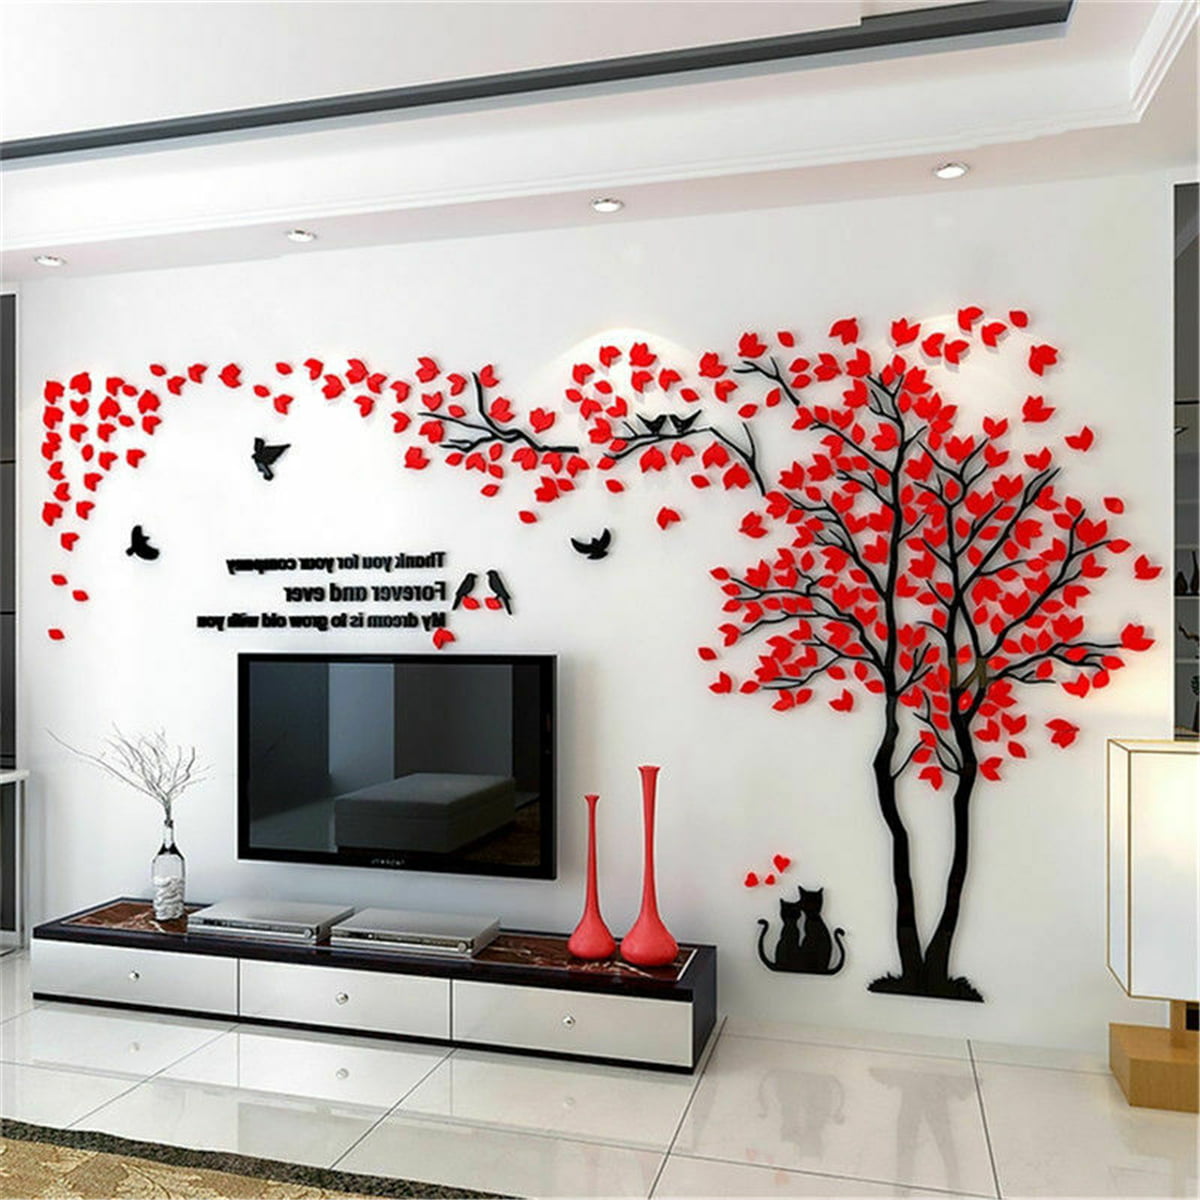 Arcylic 3D Large Tree Wall Sticker Room Decal Mural Art DIY Home TV Wall Decor 